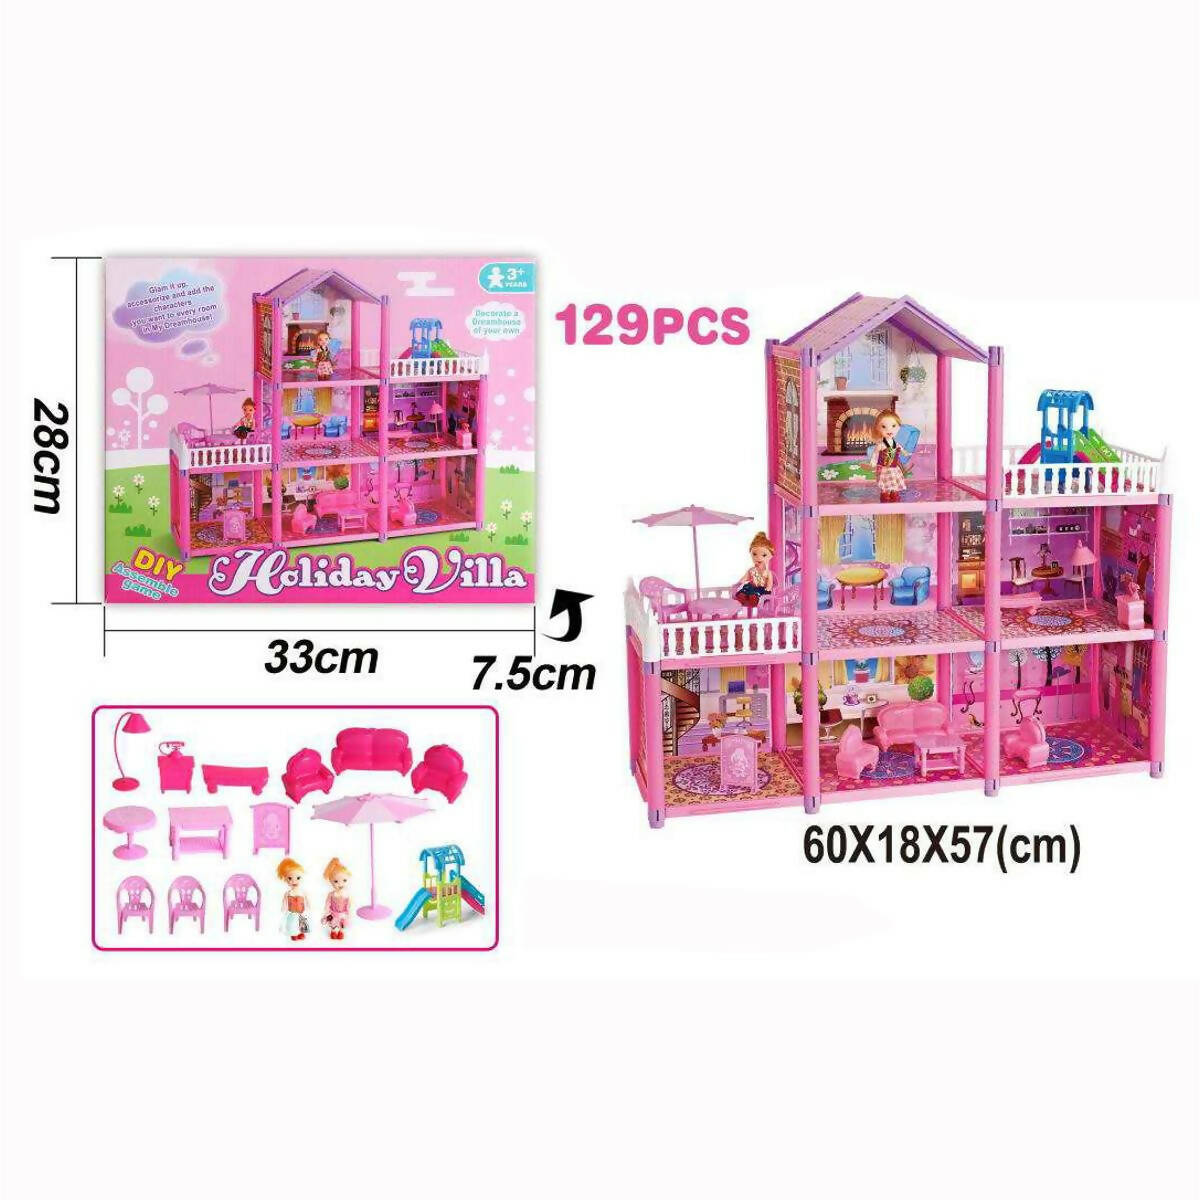 Holiday Villa Three Storey Pink Doll House For Girls - 129 pcs - 24 inches